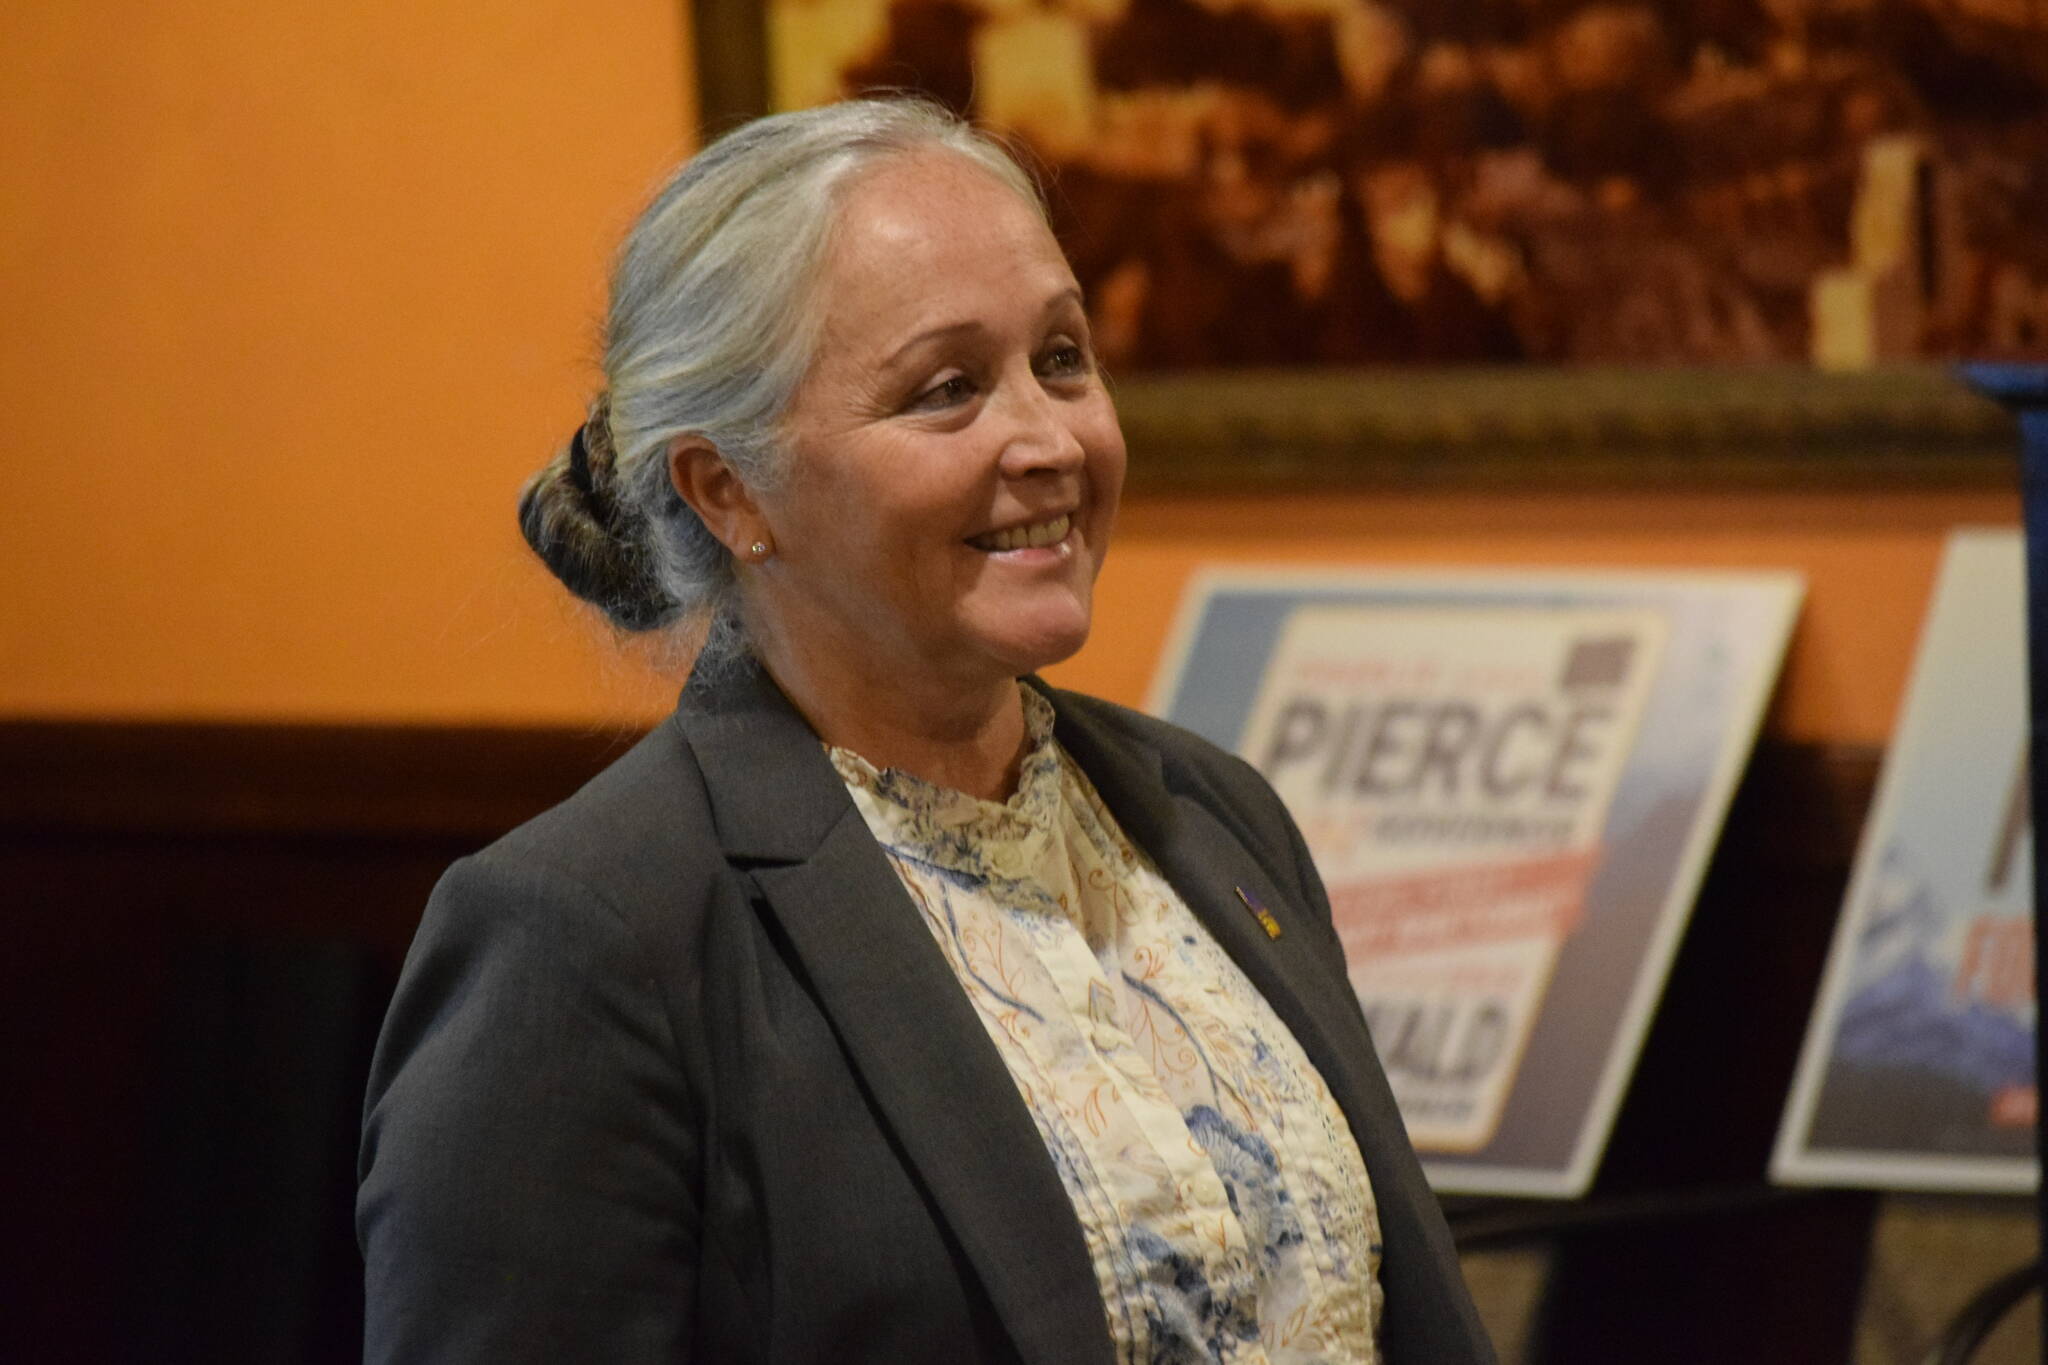 Lieutenant governor candidate Edie Grunwald speaks at a Charlie Pierce campaign event at Paradisos restaurant in Kenai on Saturday, March 5, 2022. (Camille Botello/Peninsula Clarion)